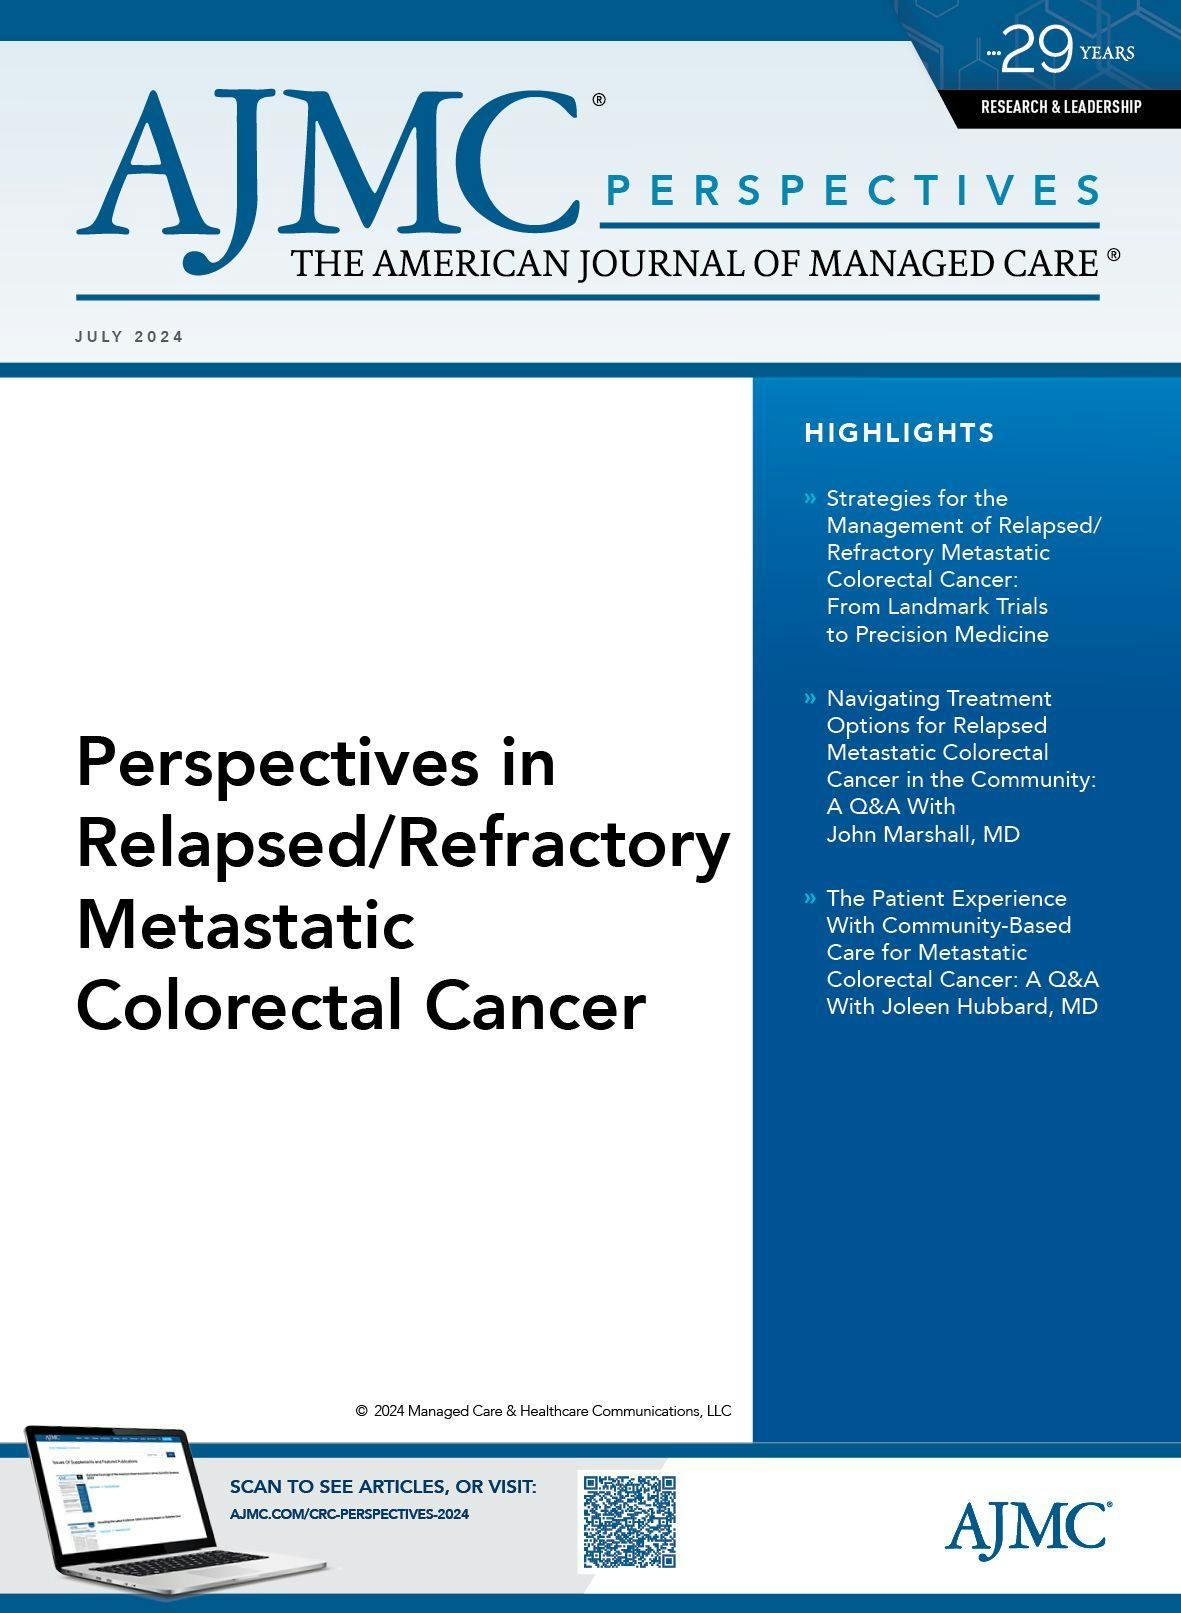 Perspectives in Relapsed/Refractory Metastatic Colorectal Cancer